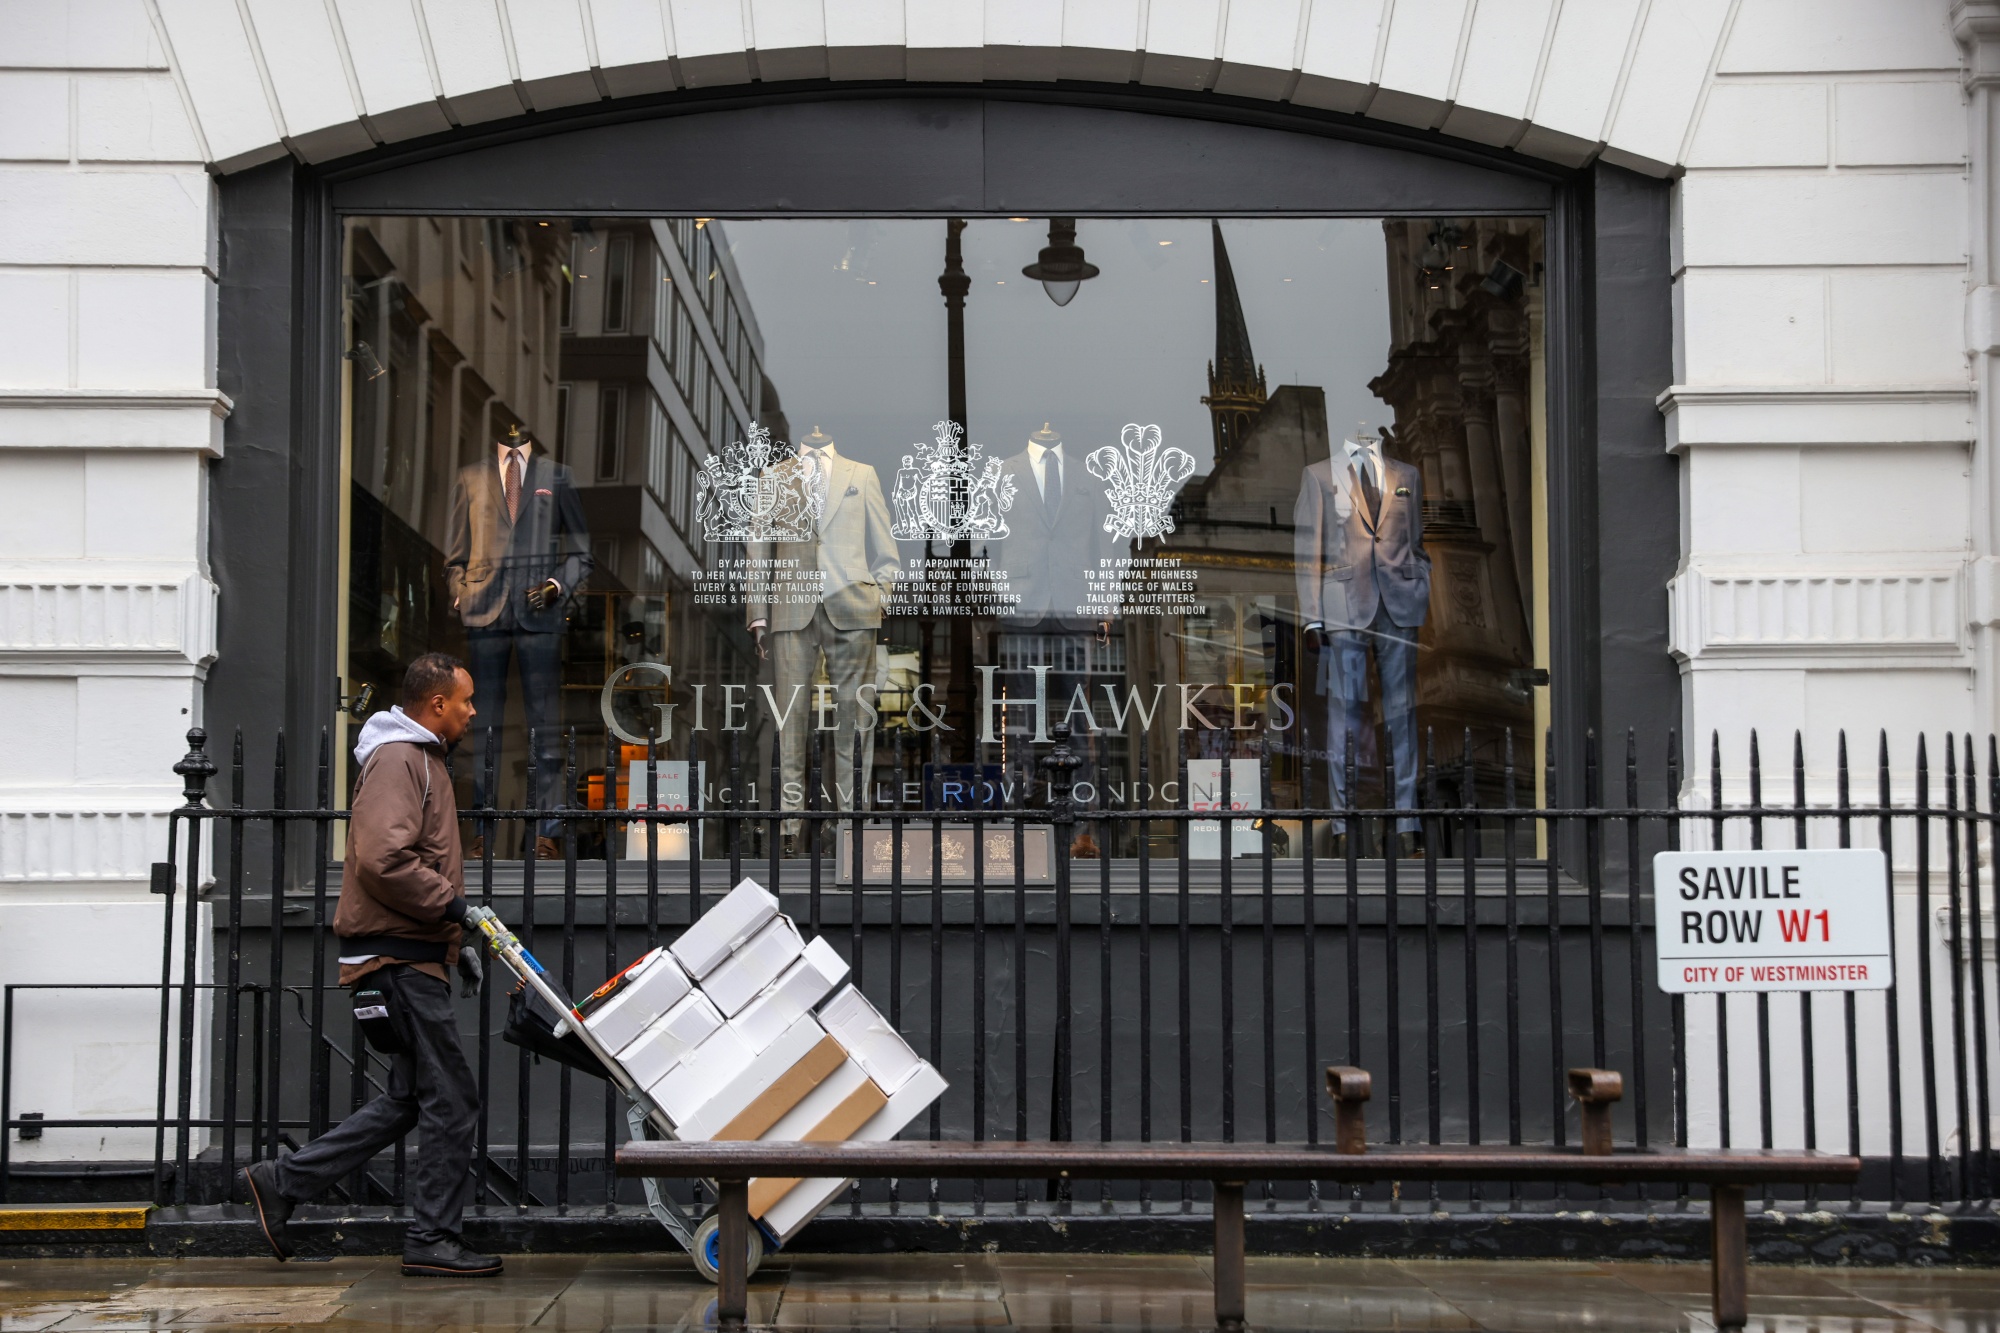 UK Tailor Brand Gieves & Hawkes' Sale Process Said to Kick Off - Bloomberg